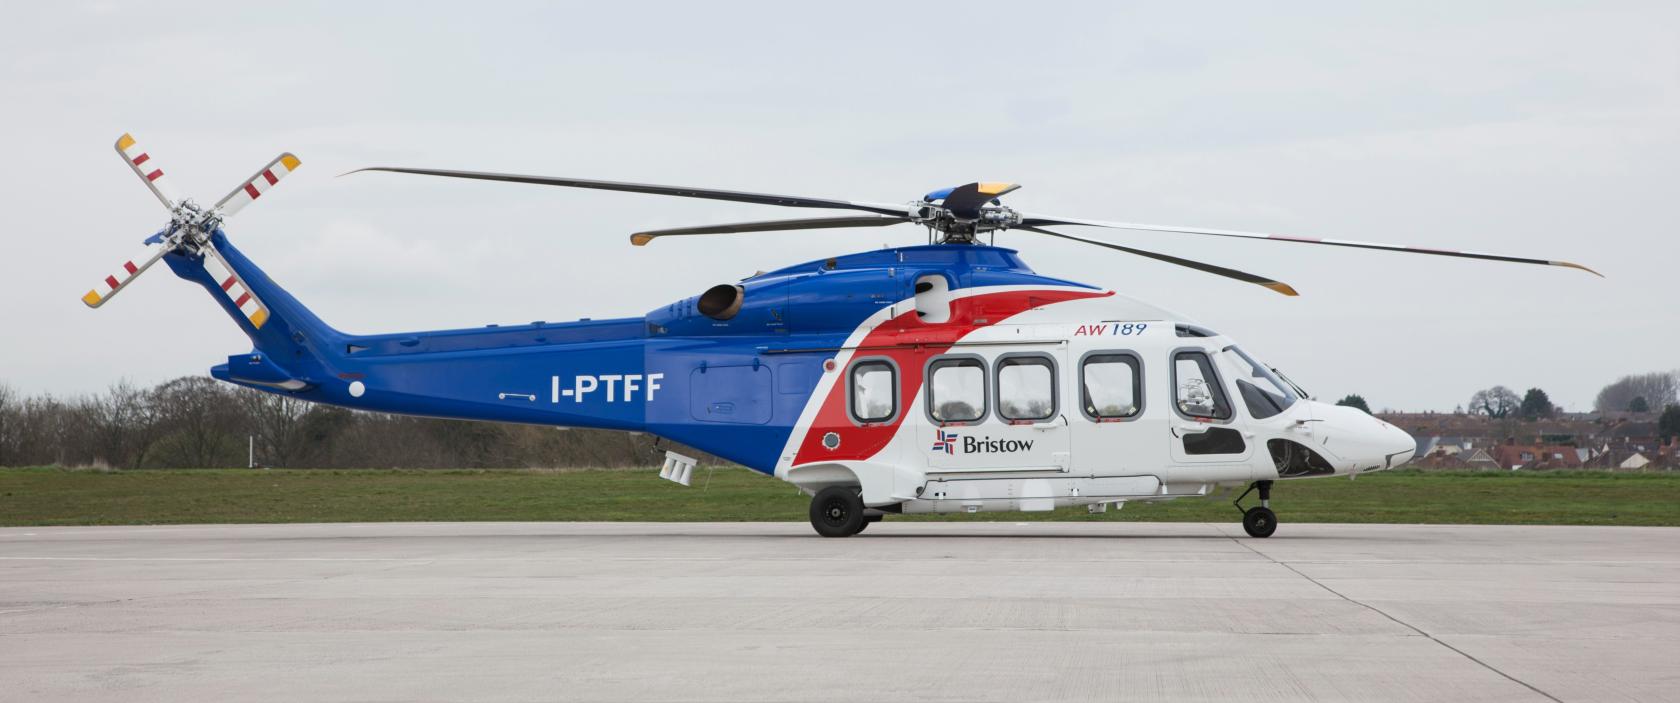 Aw189Offshore-immagine banner (1)